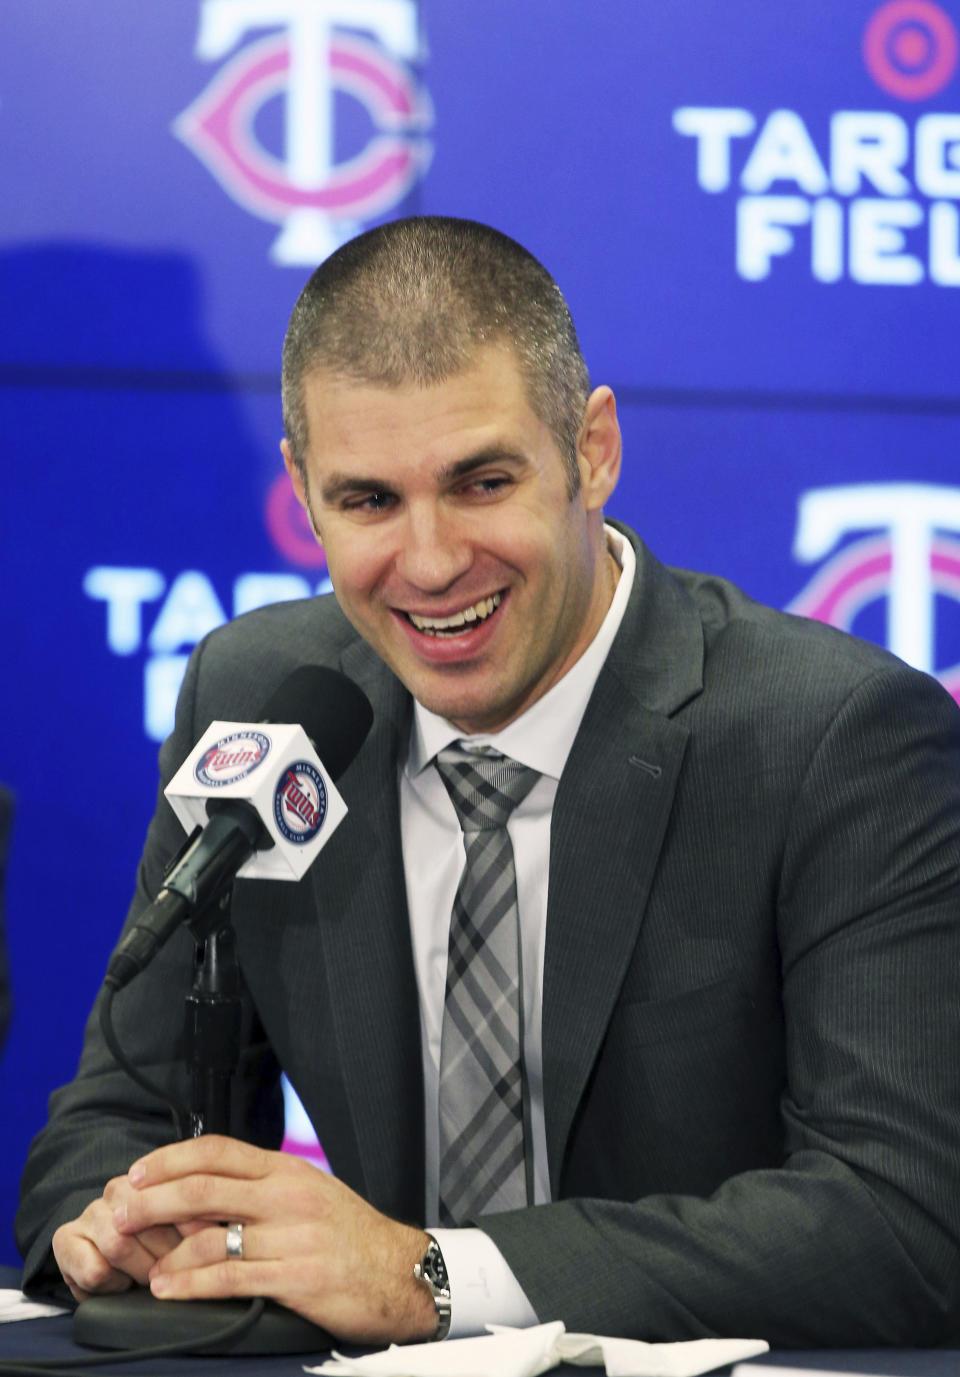 Minnesota Twins' Joe Mauer enjoys a laugh during his baseball retirement news conference Monday, Nov. 12, 2018, in Minneapolis, after playing 15 major league seasons, all with the Twins. (AP Photo/Jim Mone)